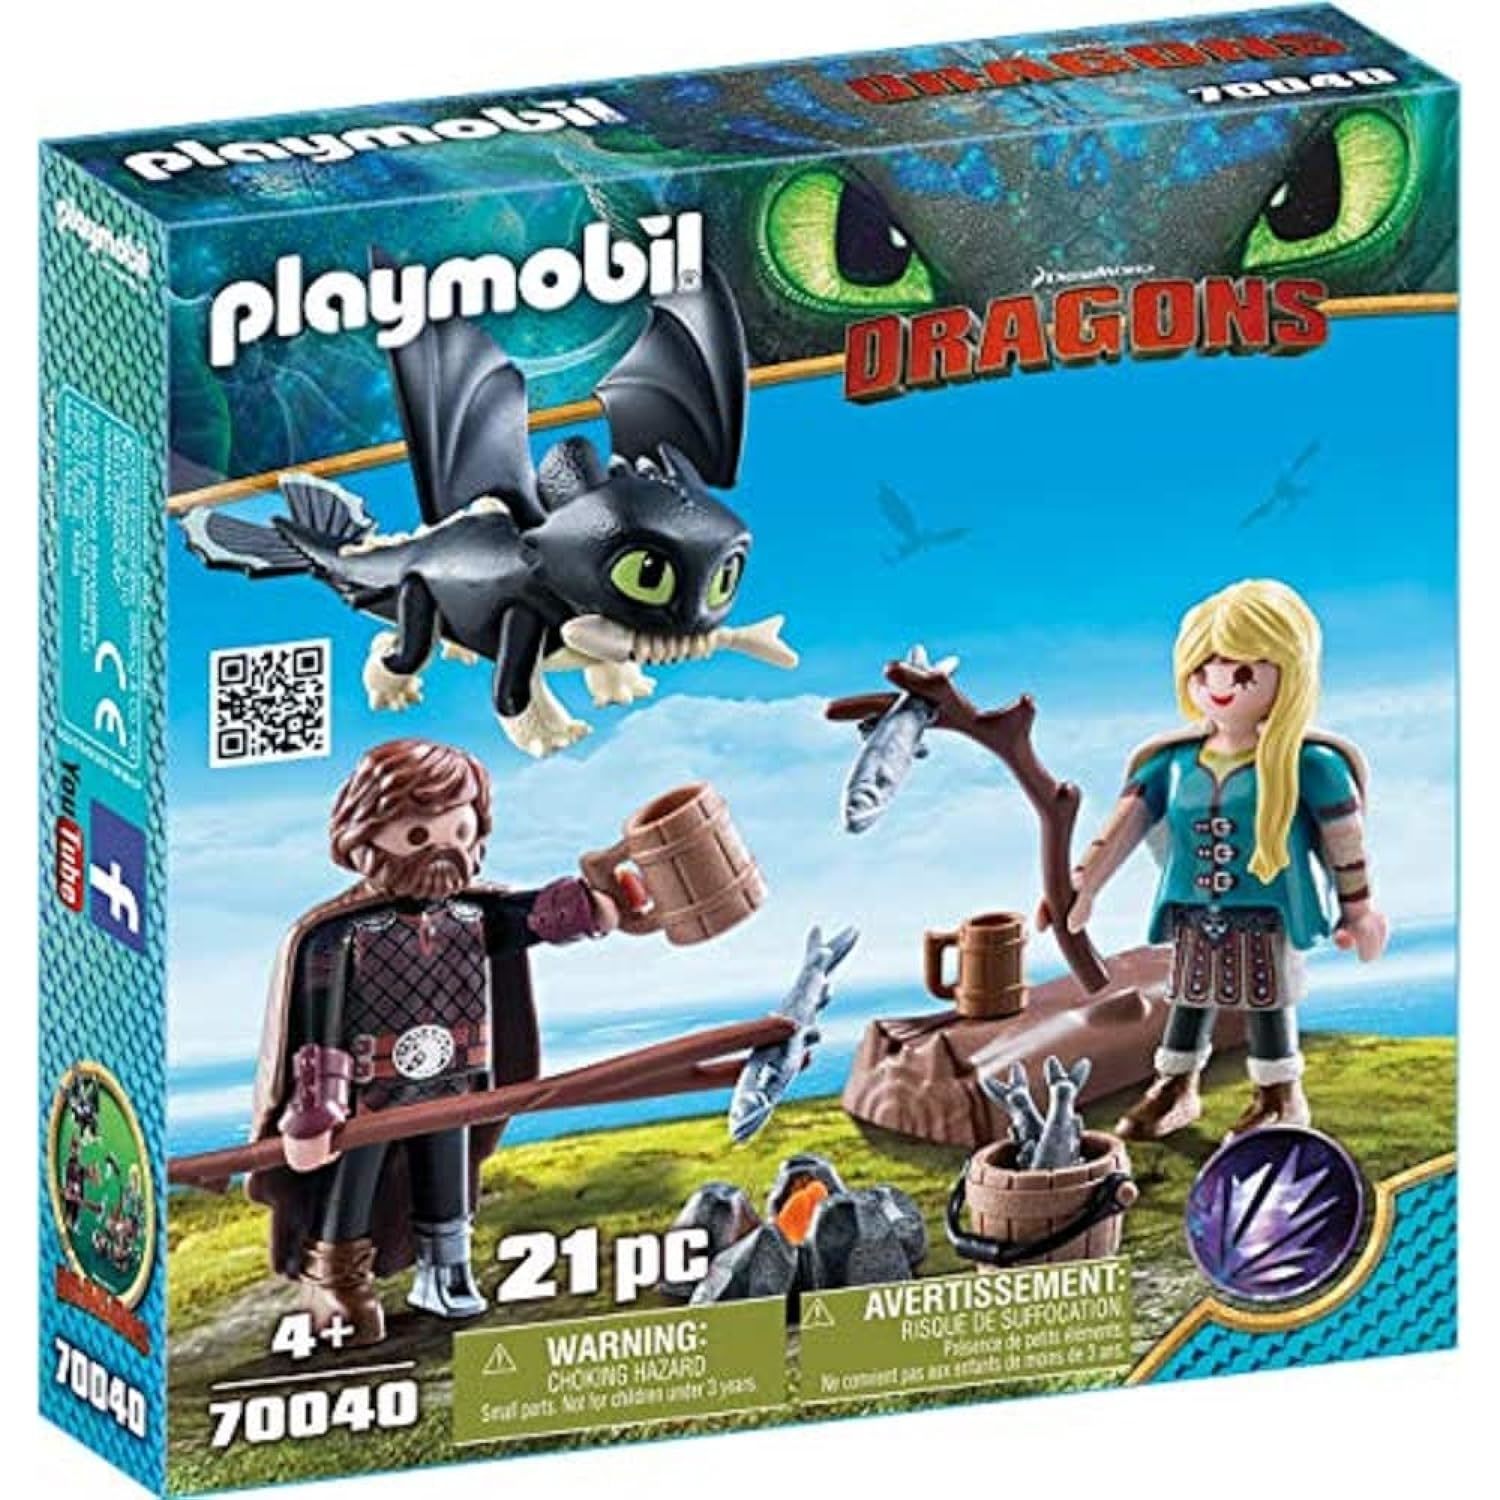 Playmobil How to Train Your Dragon III Hiccup & Astrid with Baby Dragon Multicol - $45.99